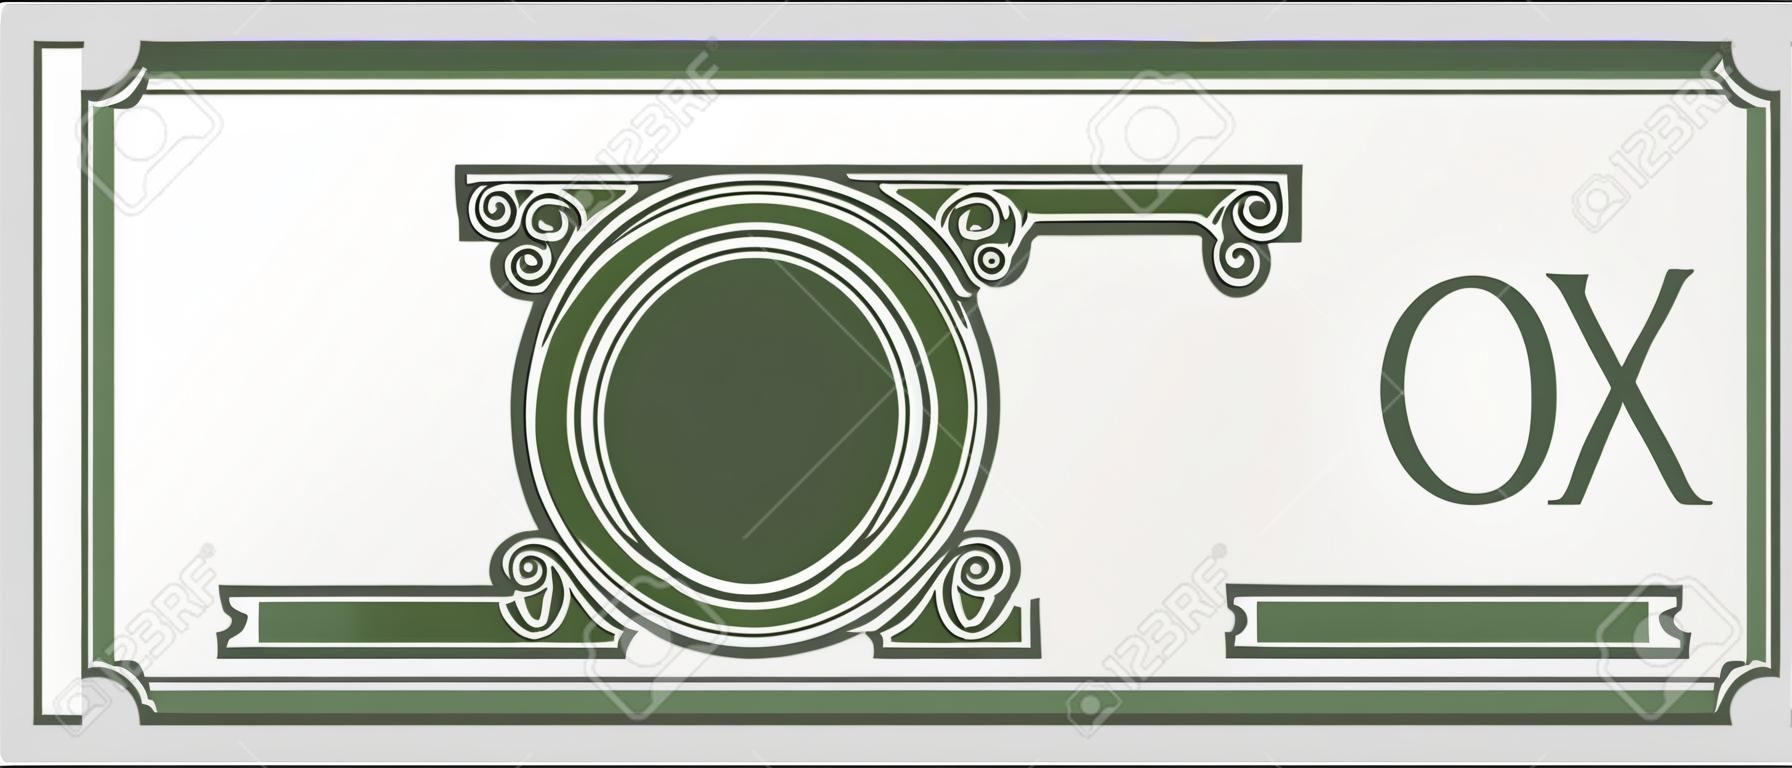 Blank Bank note